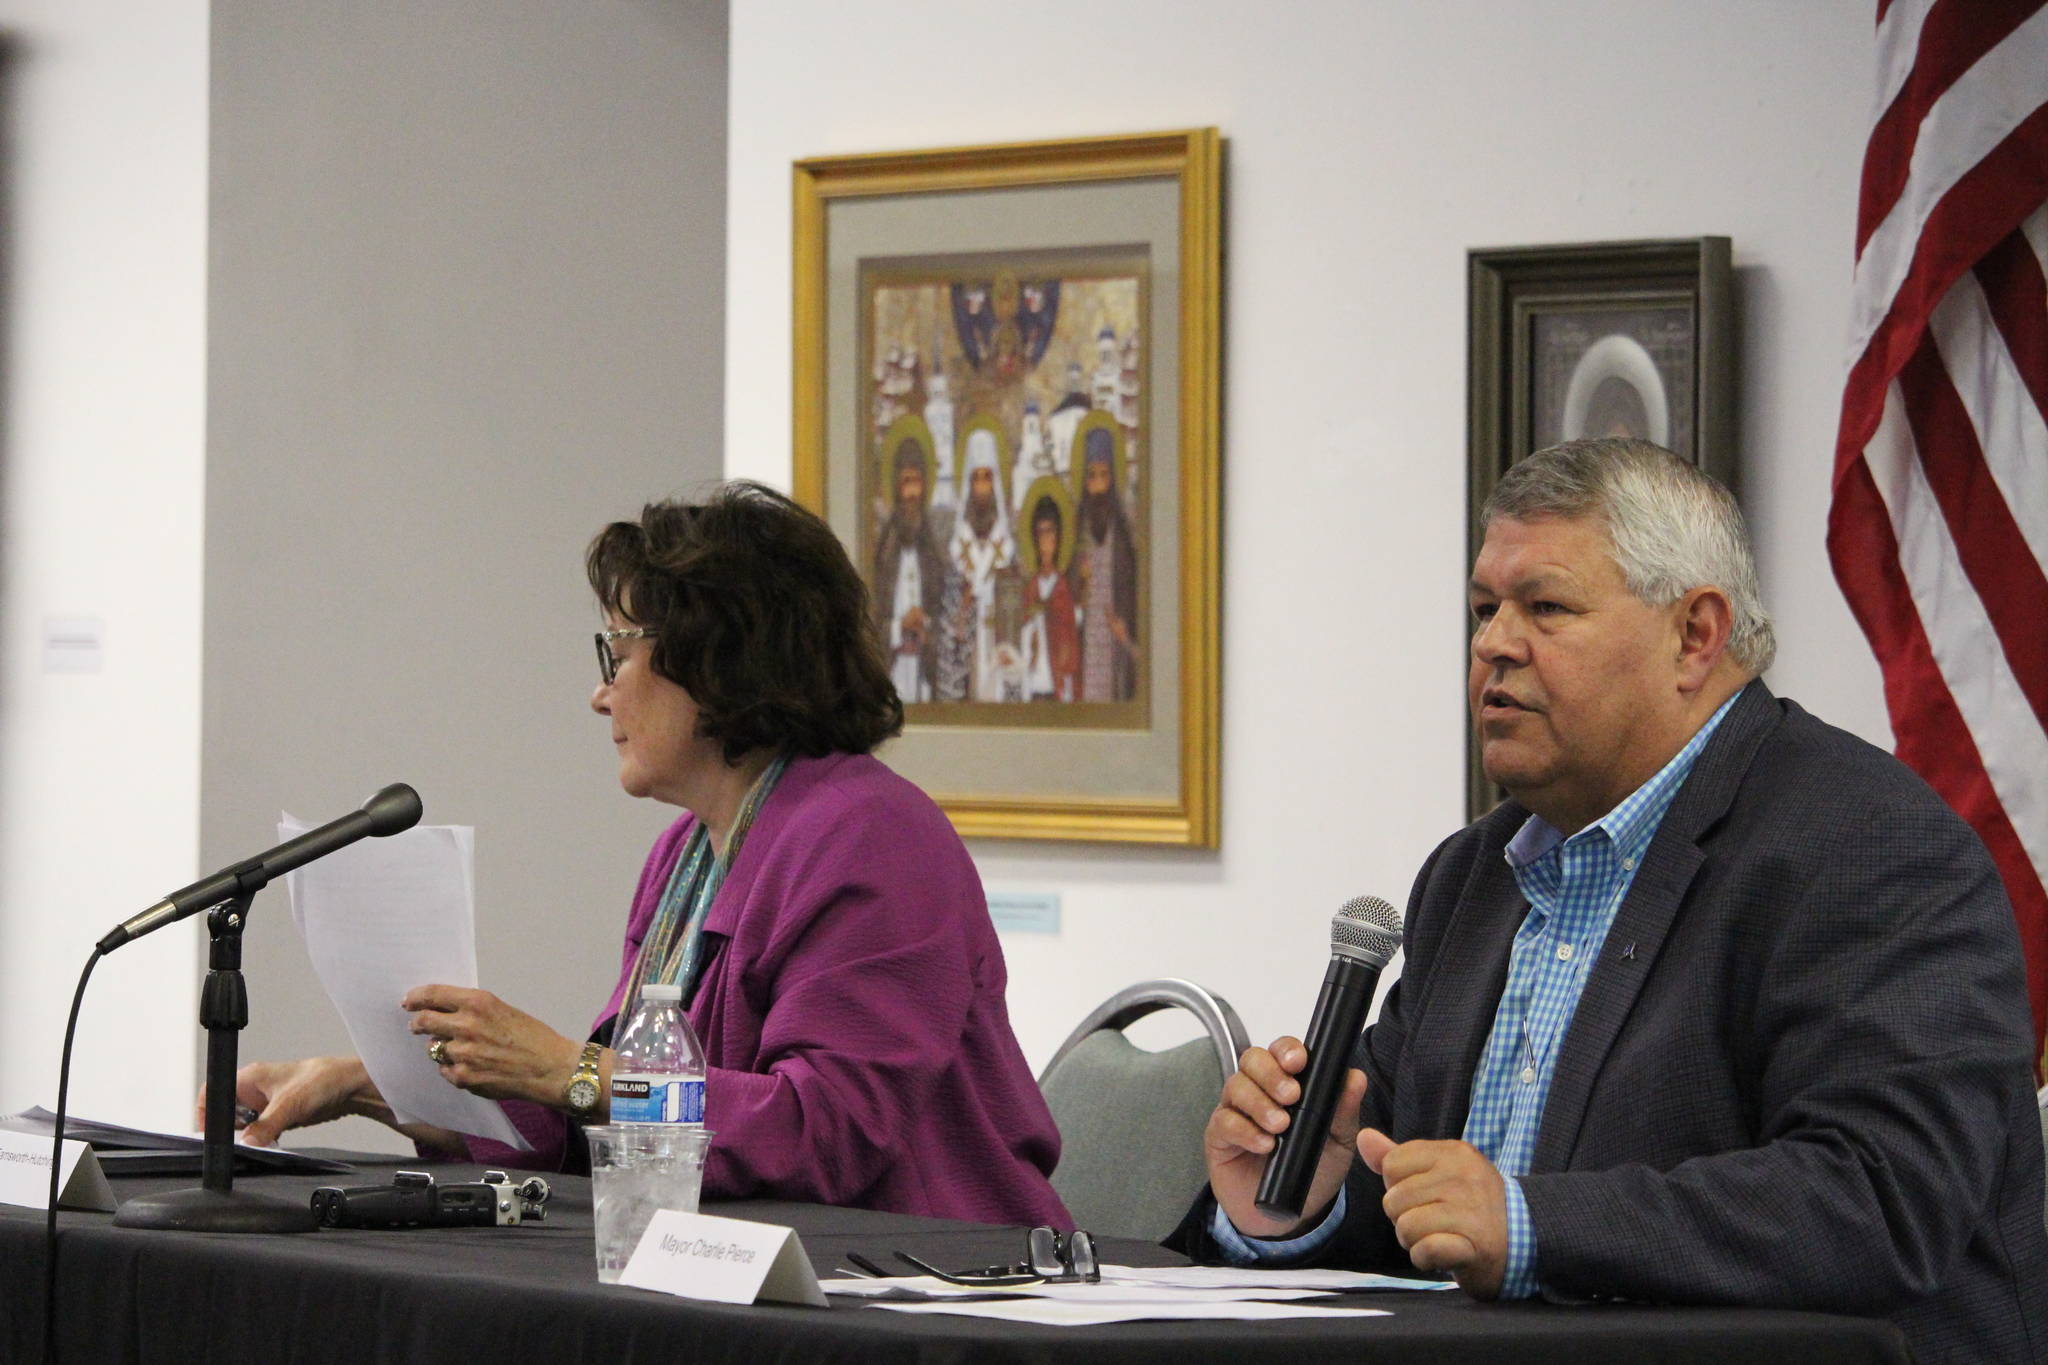 Mayoral candidates Linda Farnsworth-Hutchings (left) and Kenai Peninsula Borough Mayor Charlie Pierce (right) participate in a forum during the Kenai and Soldotna Chambers of Commerce Joint Luncheon and the Kenai Visitor and Cultural Center on Sept. 9, 2020. (Photo by Brian Mazurek/Peninsula Clarion)